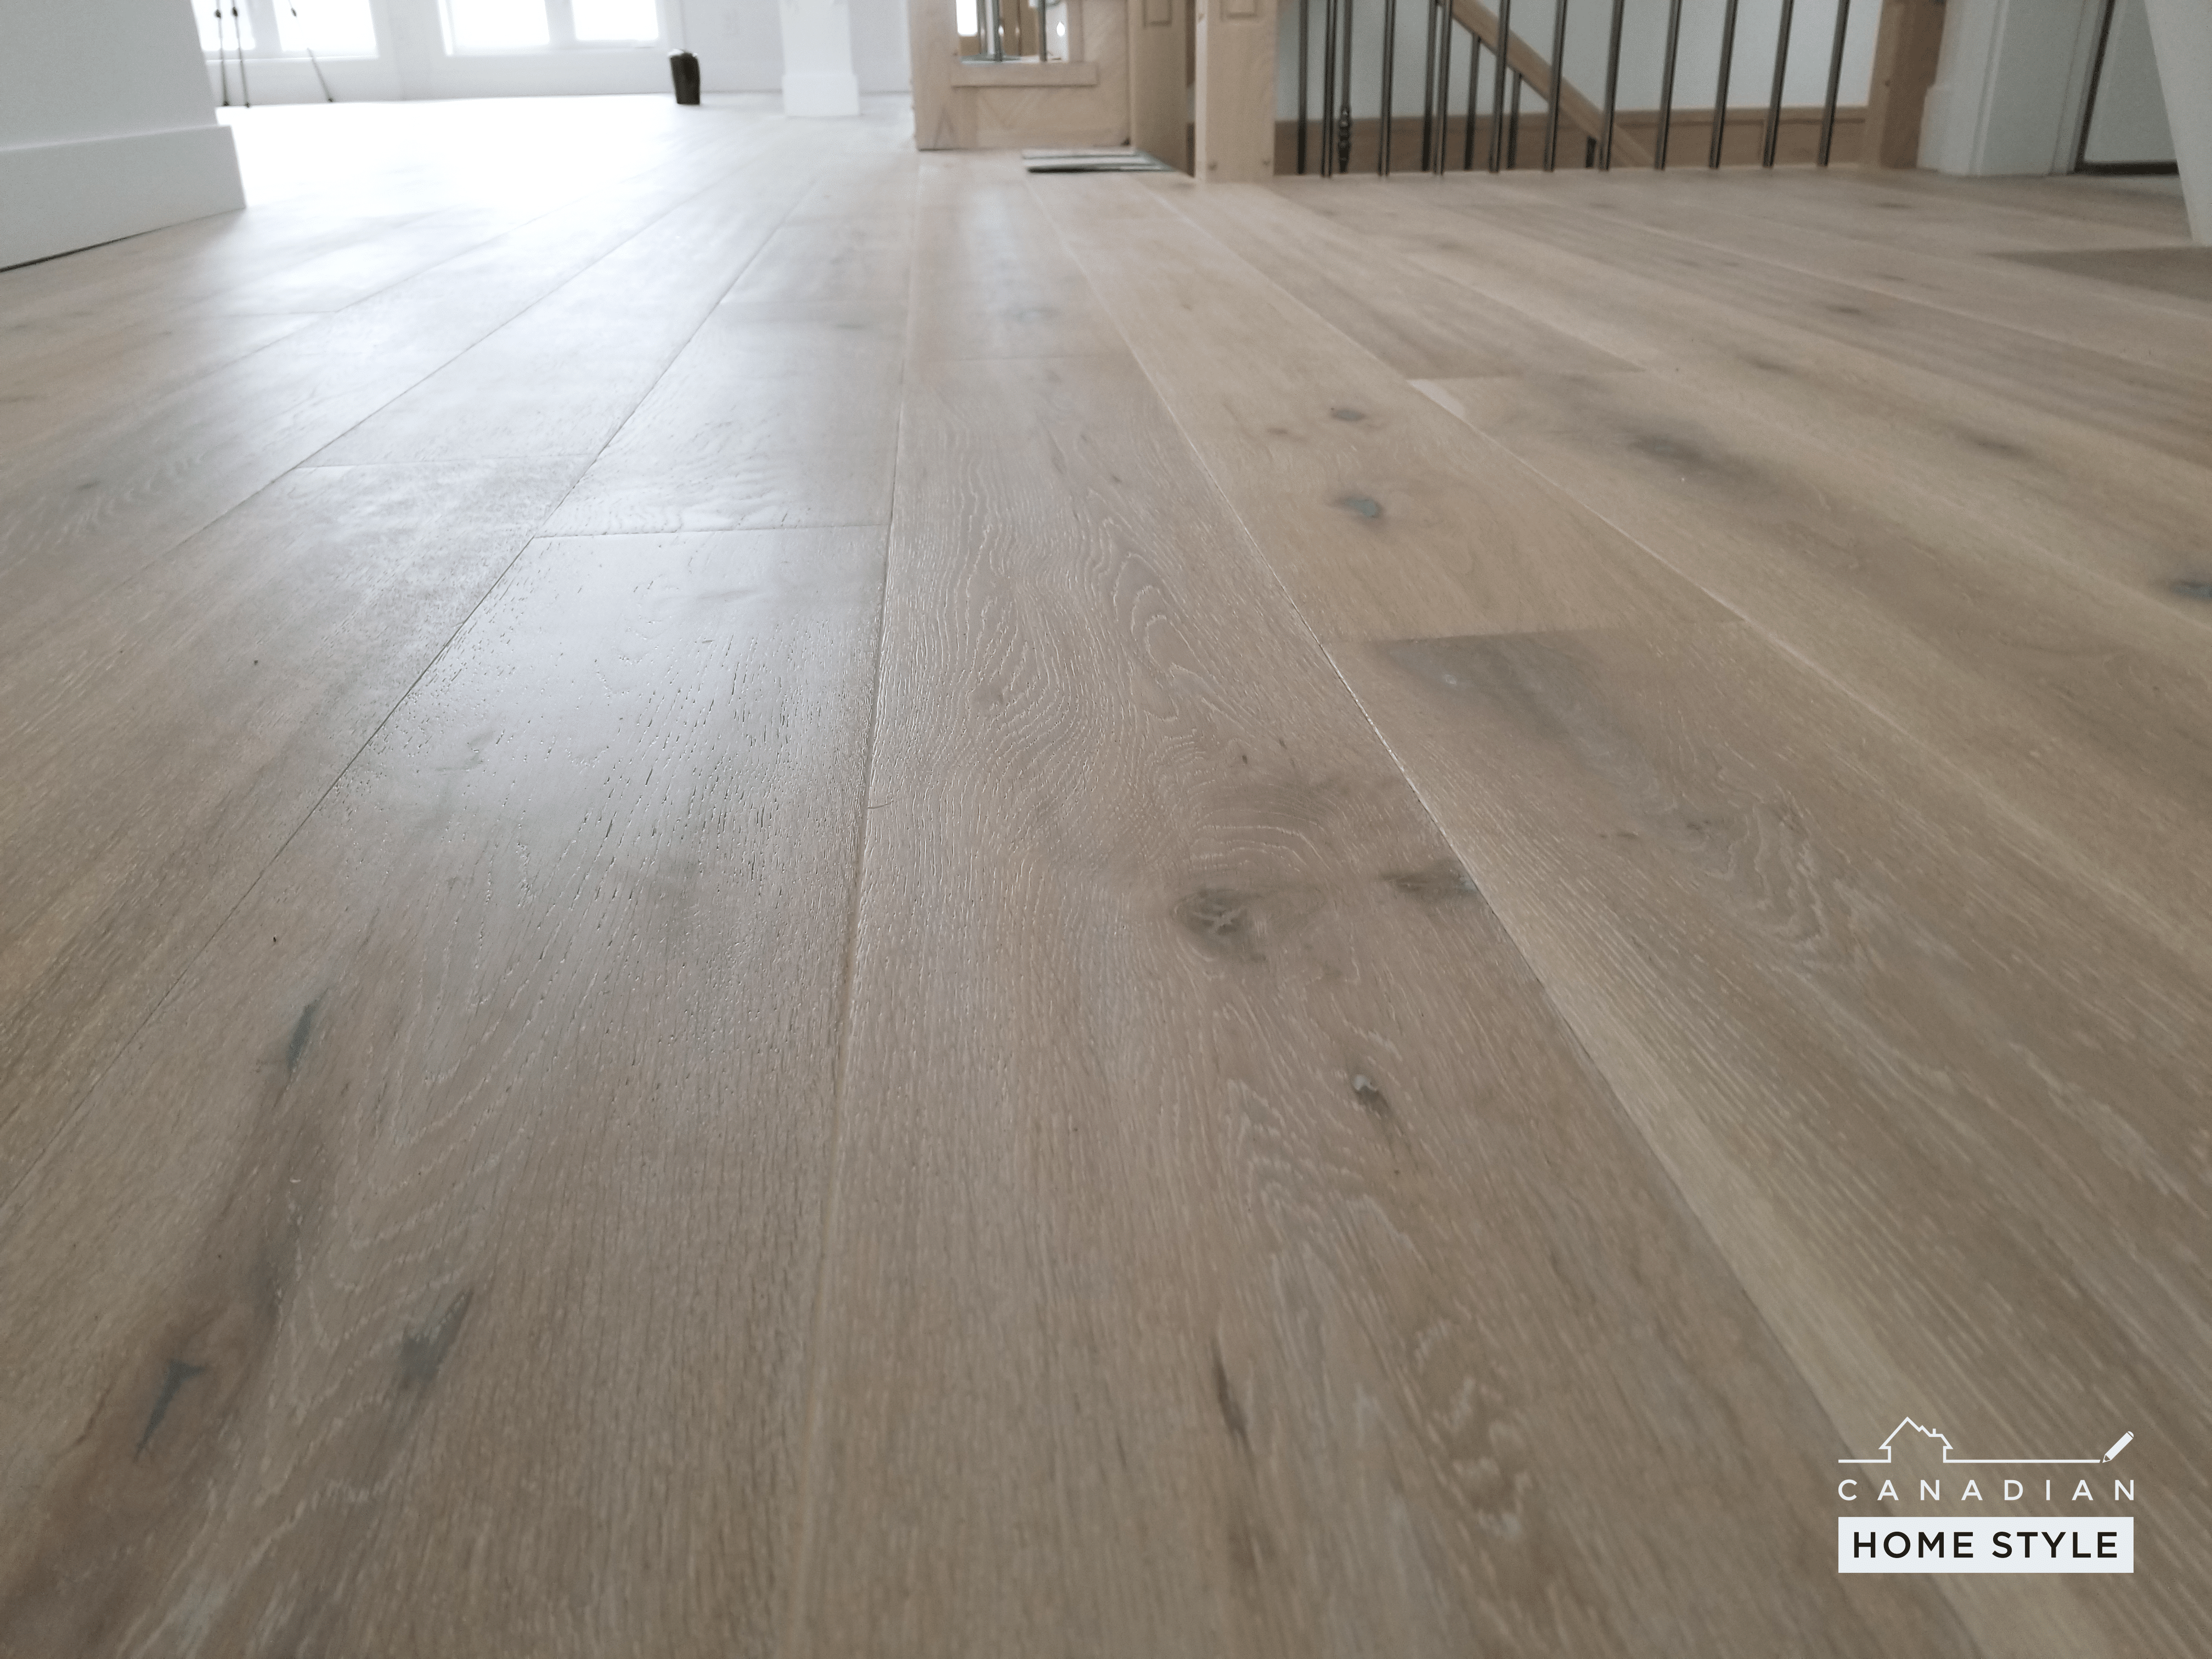 Authentic look with solid oak floors in Vancouver